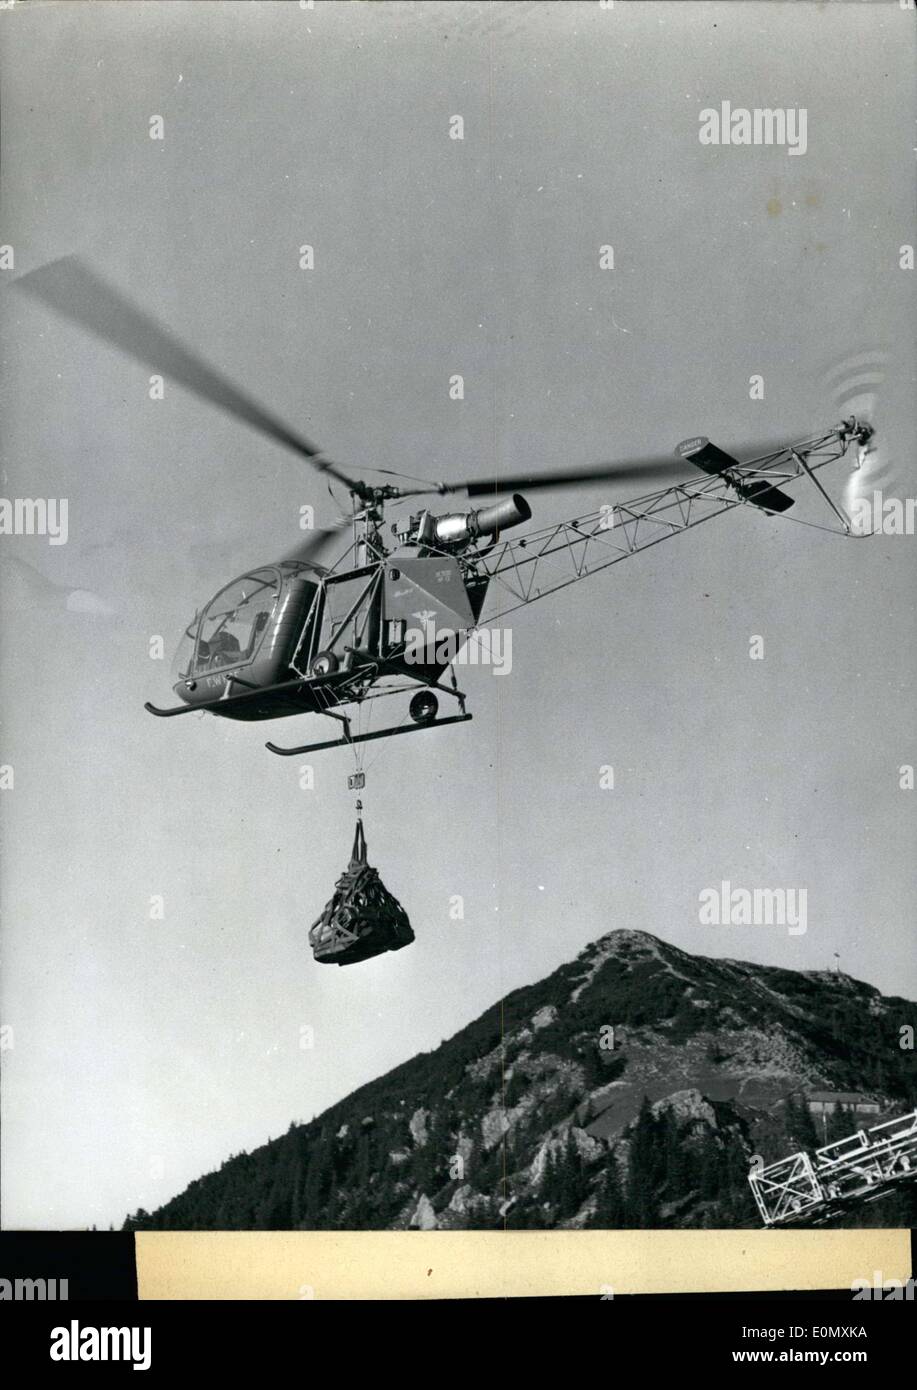 Oct. 29, 1956 - French Gas-Turbine Helicopter in Rescue Mission. In the Wallberg region at Tagernsee the French gas-turbine helicopter ''Alouette II'', which is vibration-free and better in fuel consumption in contrast to the motor-driven helicopter, was demonstrated by the German armed forces and the mountain rescue service. It is better in fuel consumption since it can use the cheapest variety of petrol. The helicopter, which can offers seven seats, is meant for rescue missions. Two wounded persons can be fixed on the sides on stretcher-bunks Stock Photo